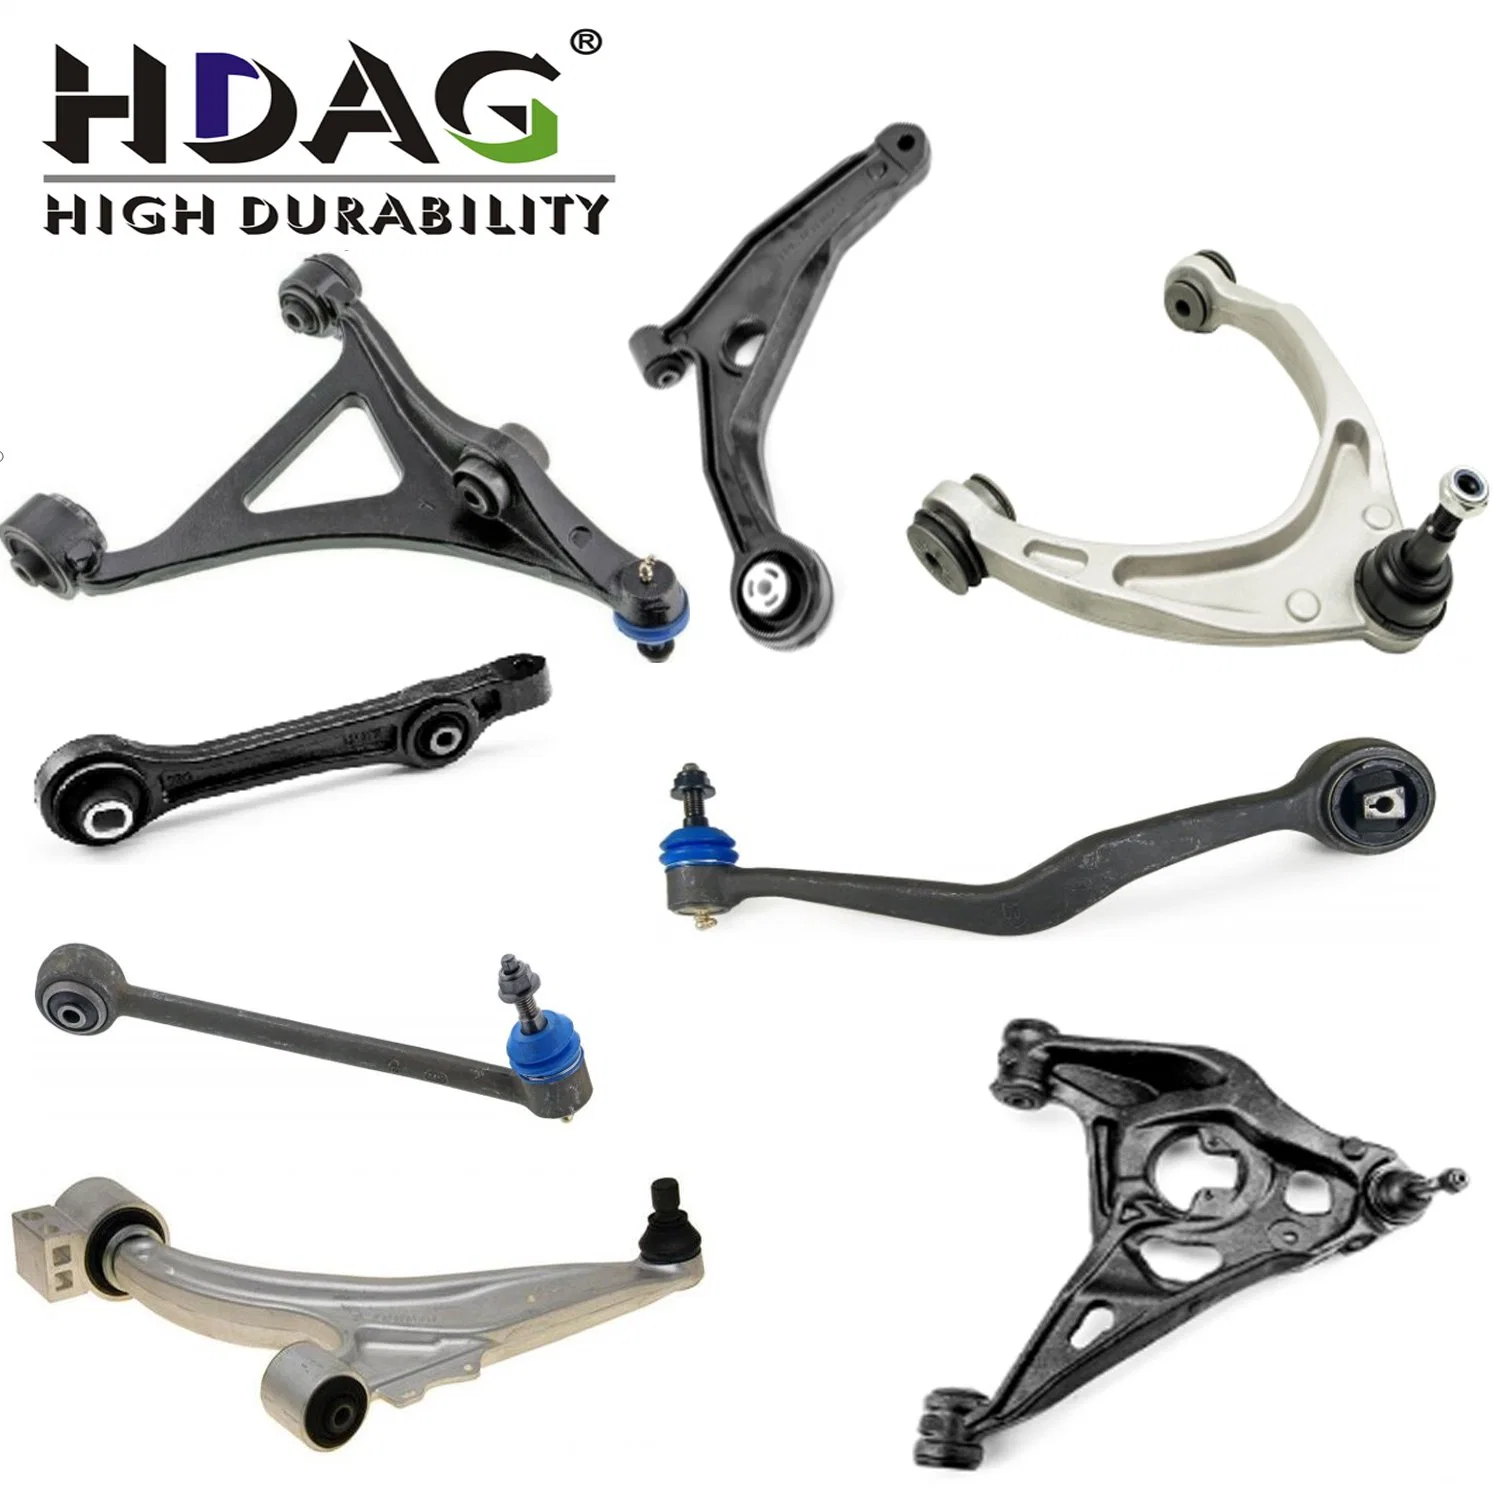 Hdag Lower Front Axle Left and Right Control Arm Factory for Dodge,Chrysler,Chevrolet,Gmc,Pontiac OEM No. 4782561ae K640664; 5168282AA 5168283AA; 92250641; 9225